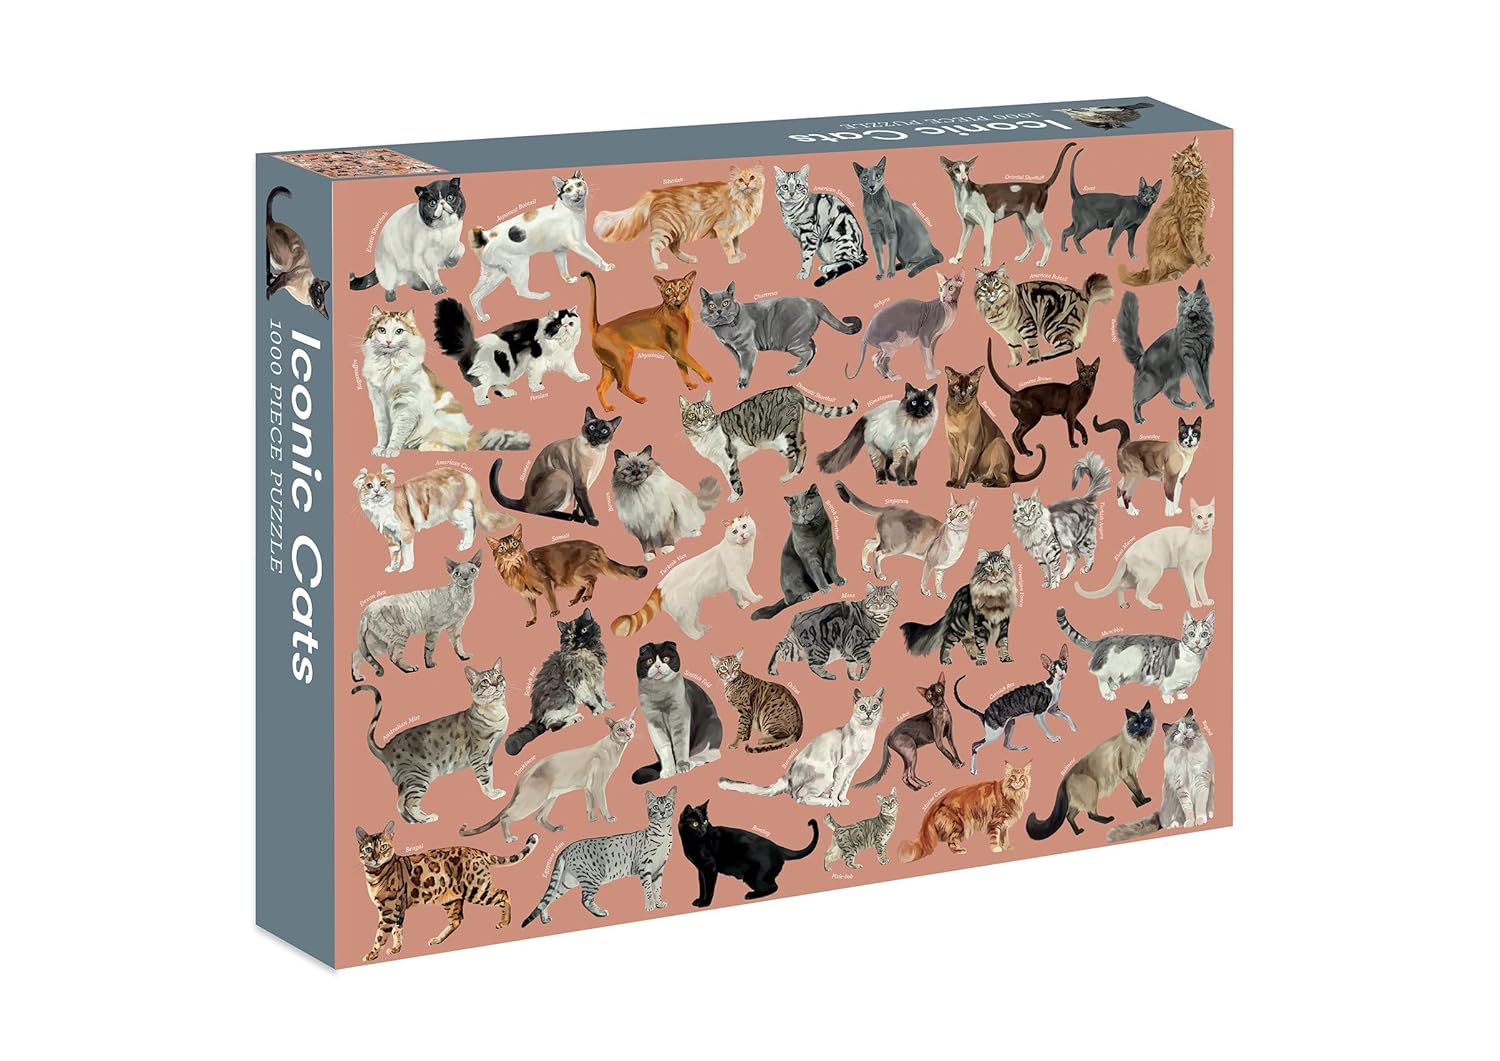 iconic cats puzzple box with a blush ponk background and illistrations of cats all over it.